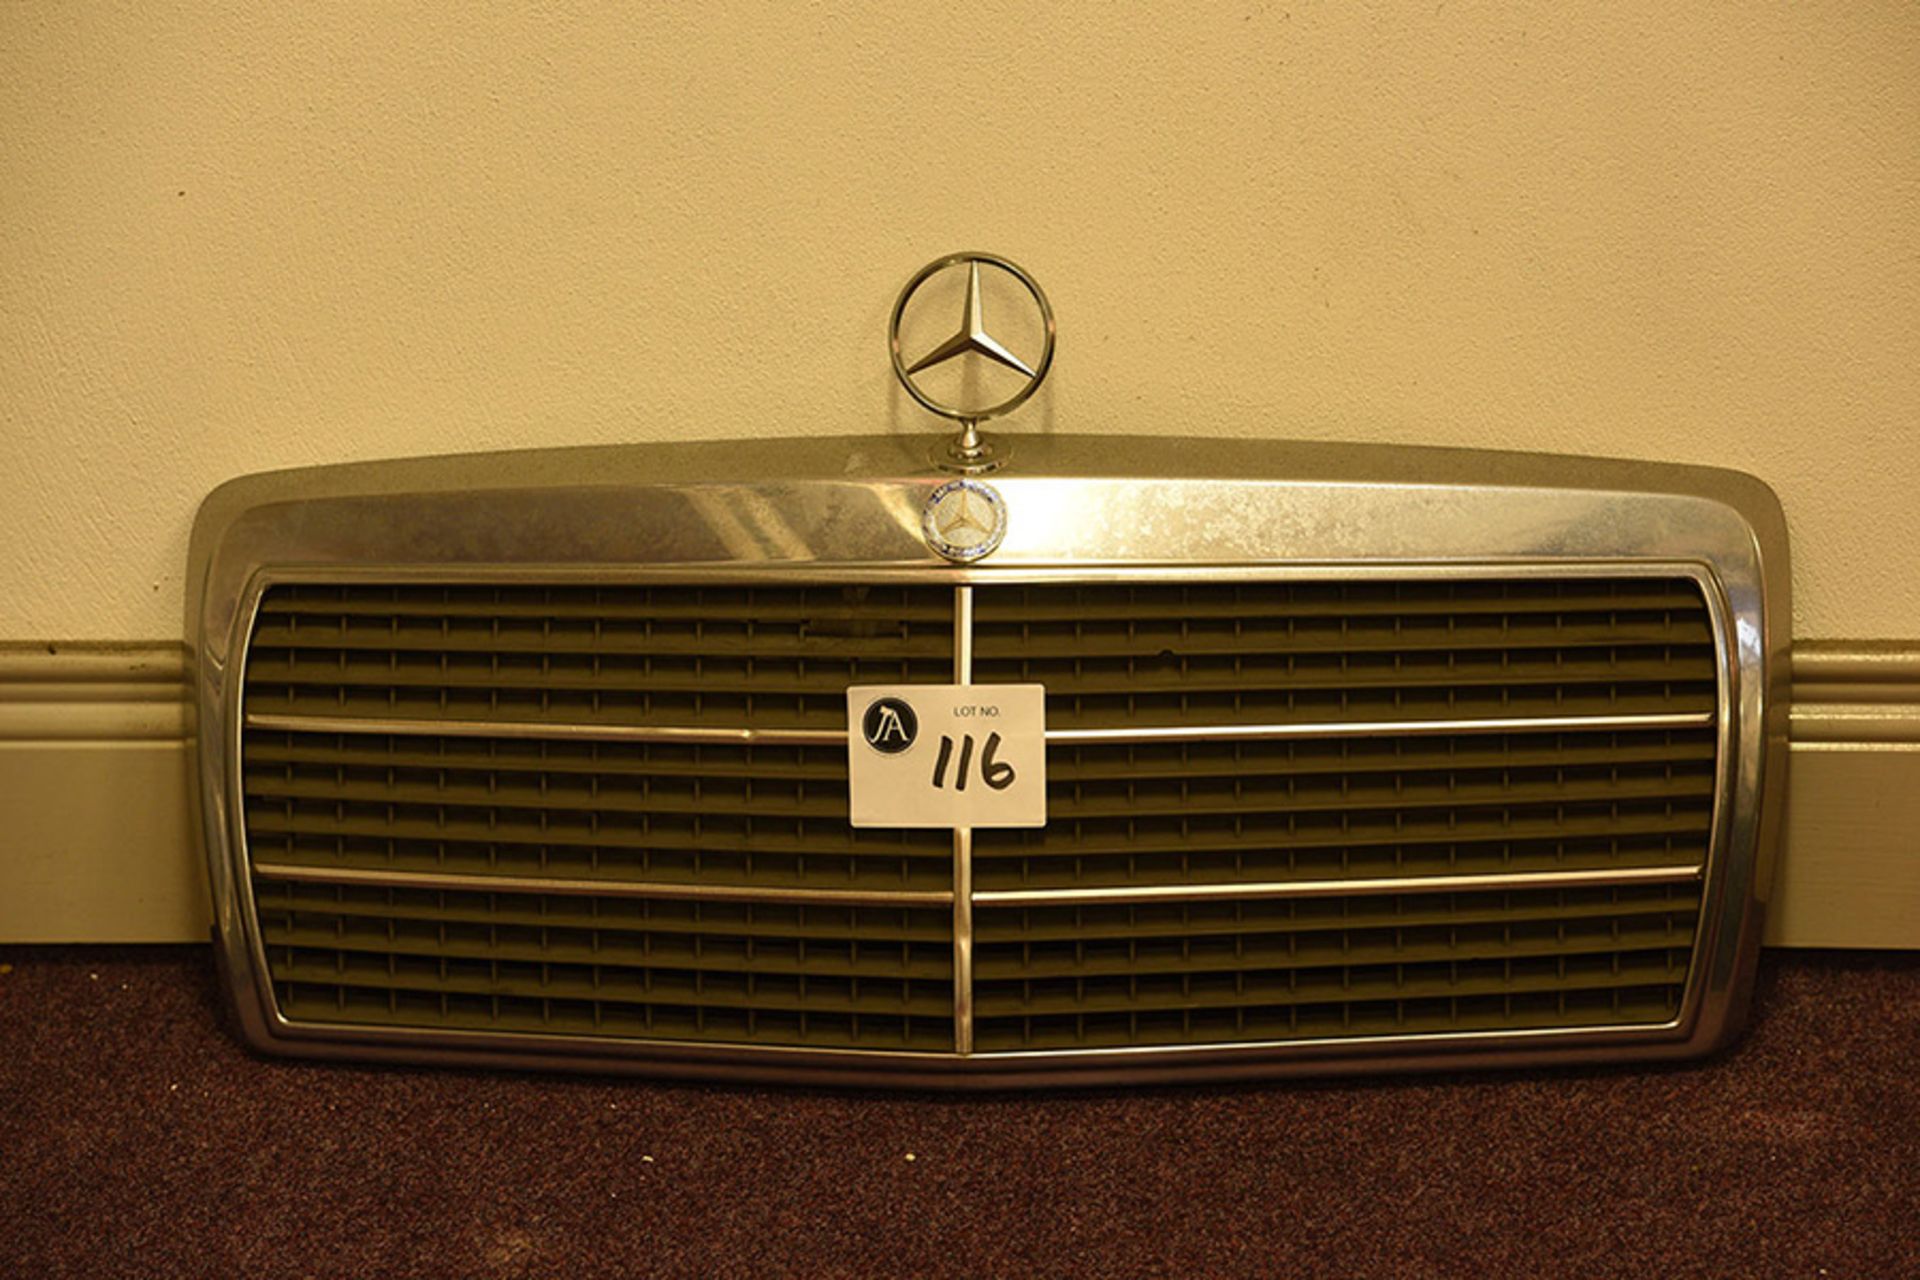 Mercedes chrome front grill